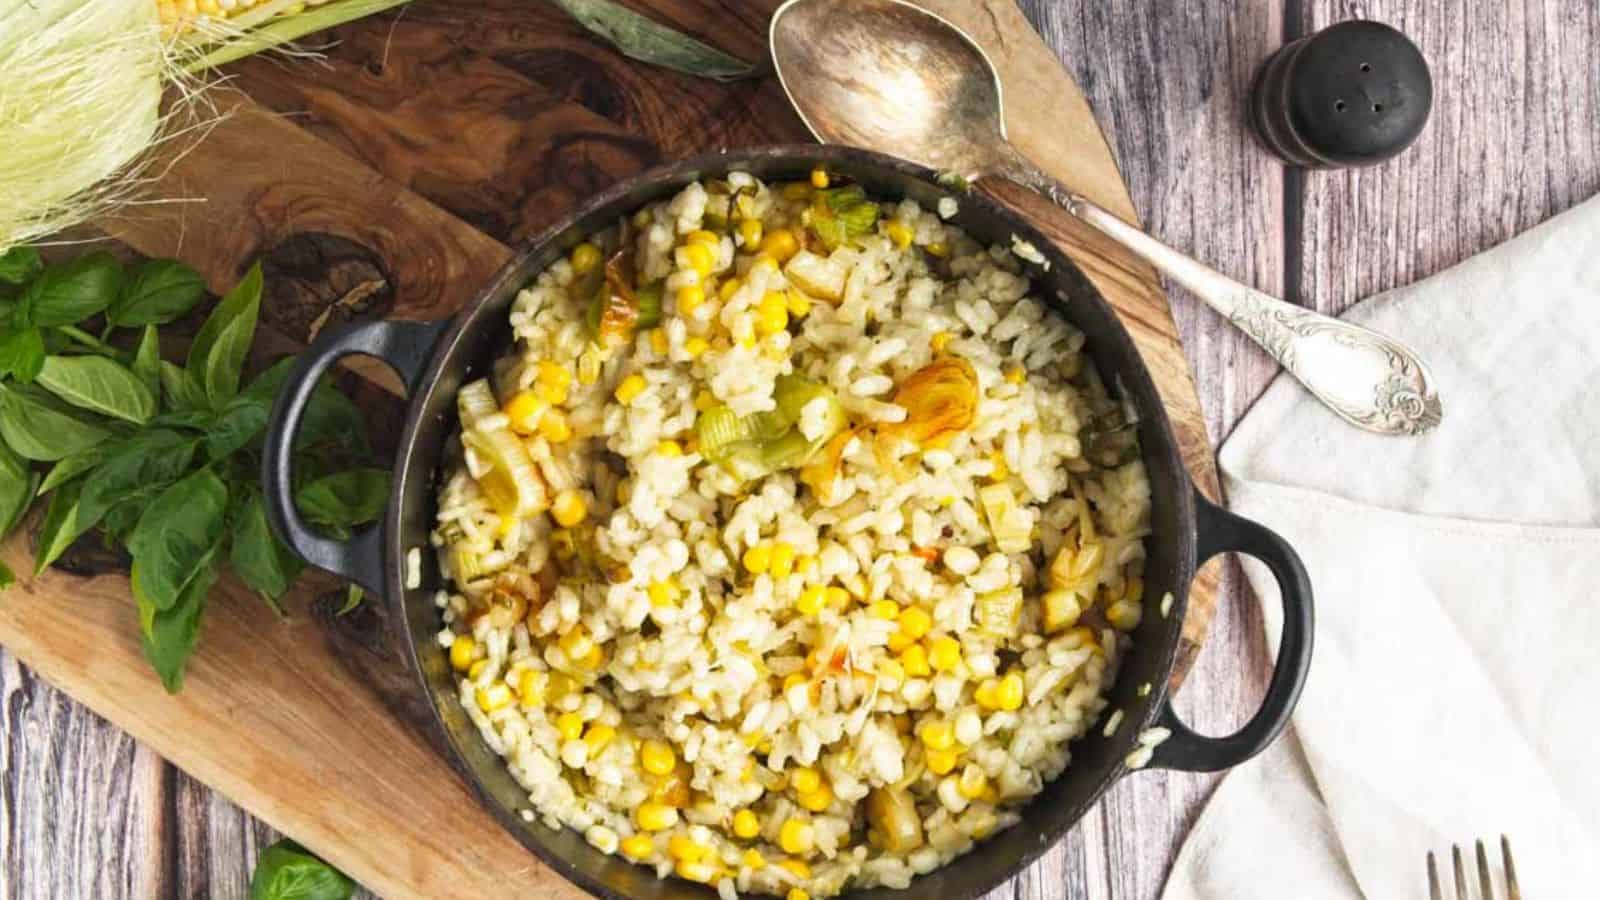 Sweet corn risotto in a skillet on a wooden cutting board.